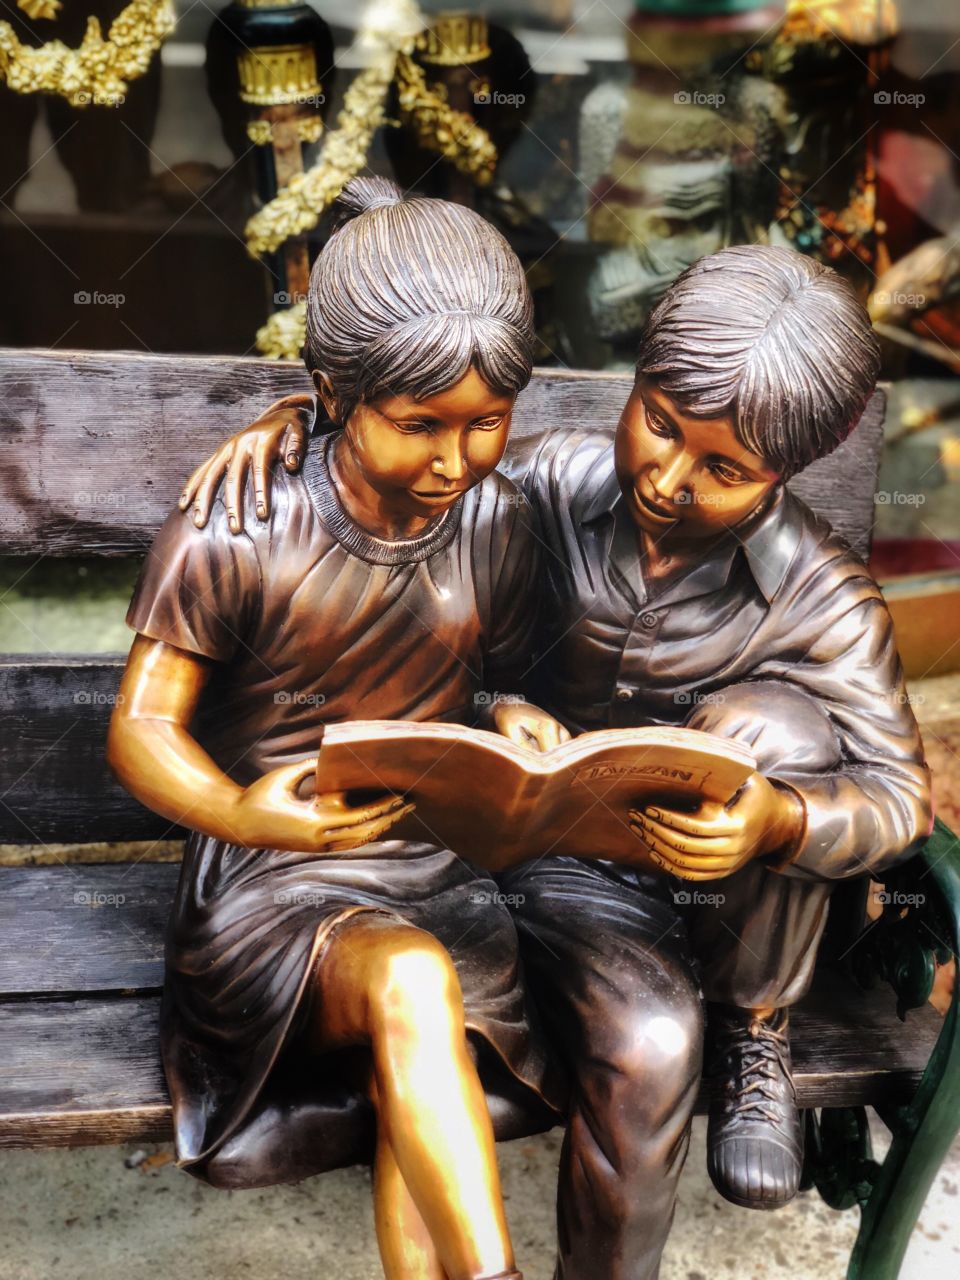 A metal statue with 2 kids reading a book on a bench.